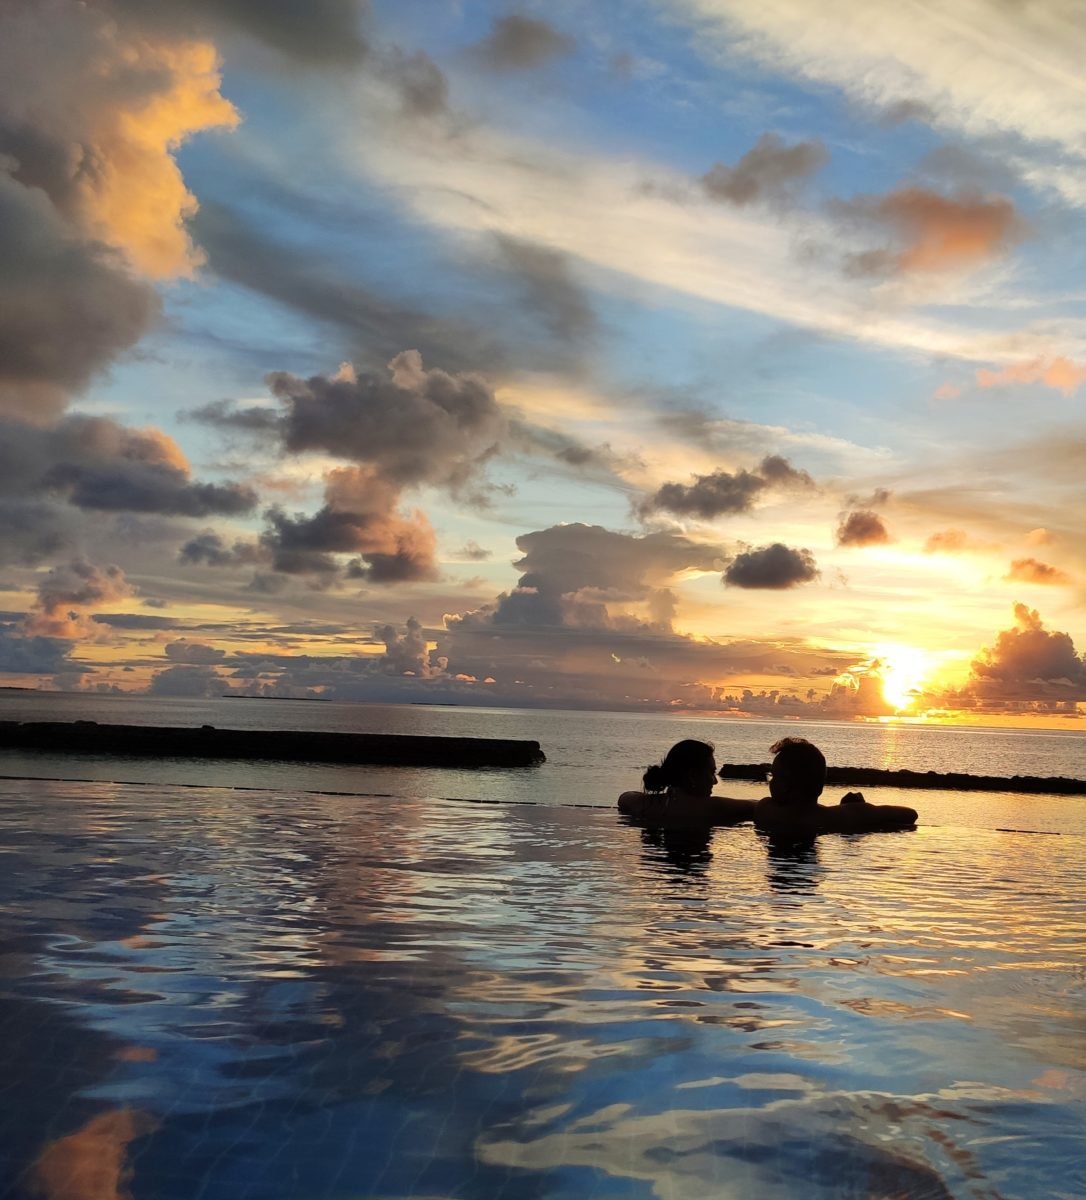 Sunset from the resort in Maldives